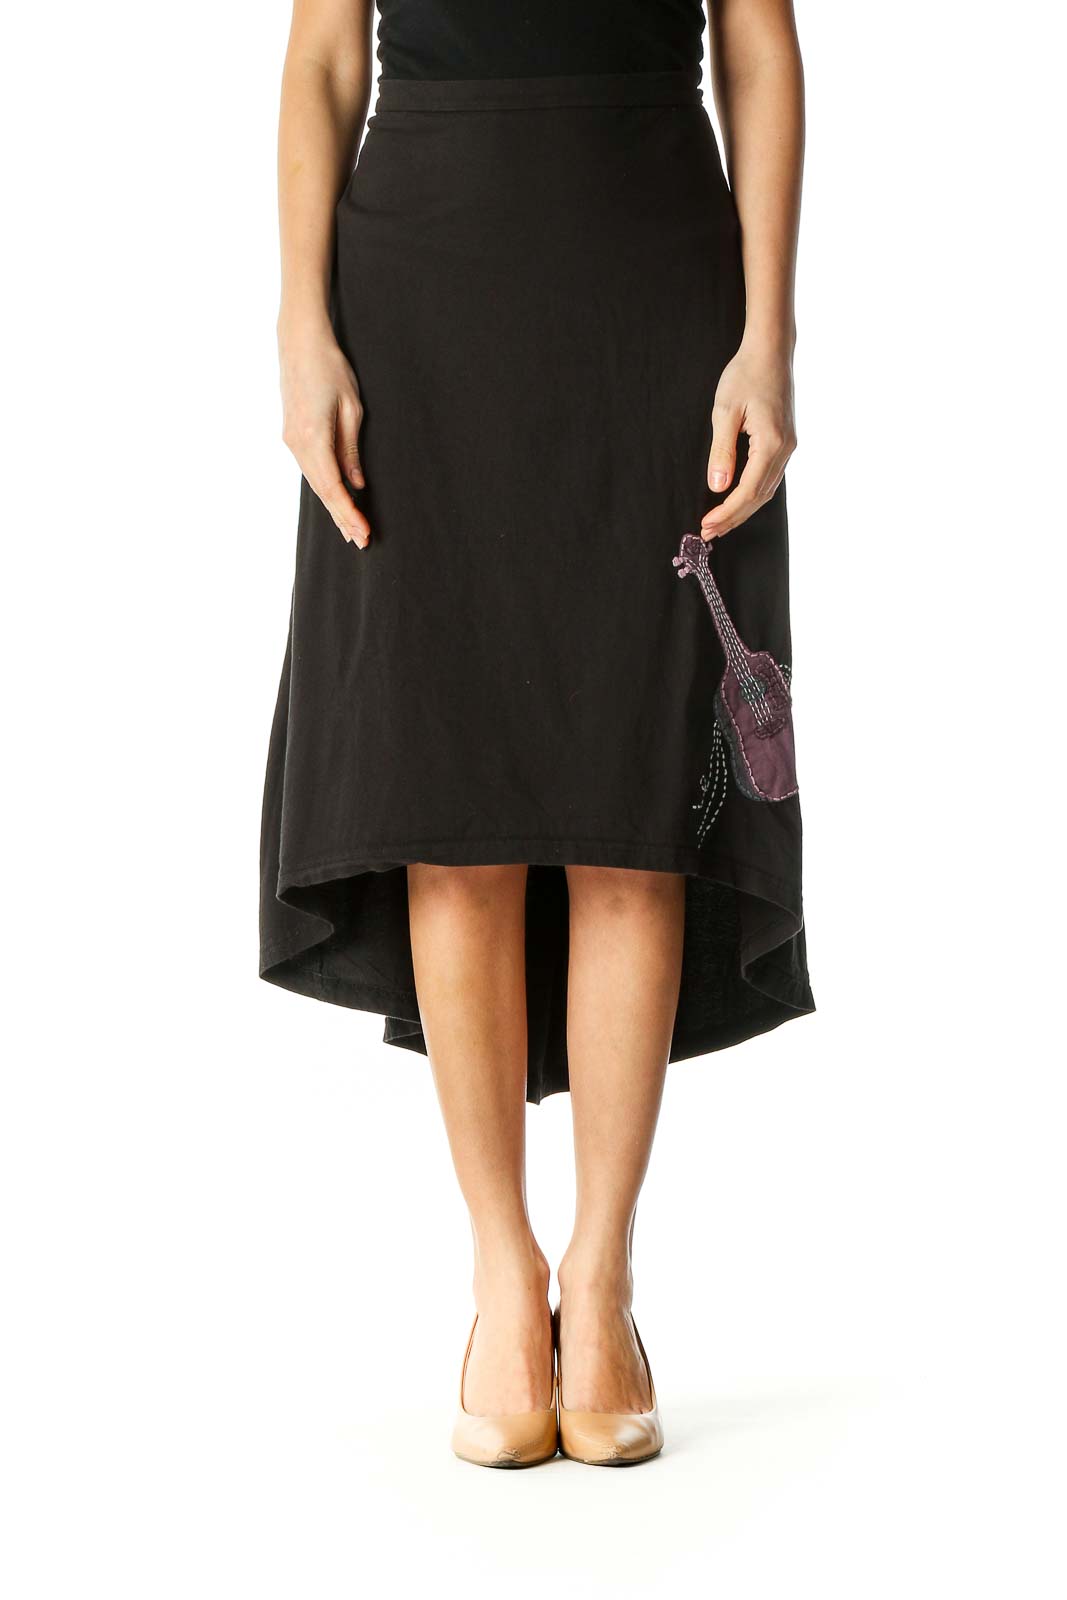 Black Solid Retro Flared Skirt Front